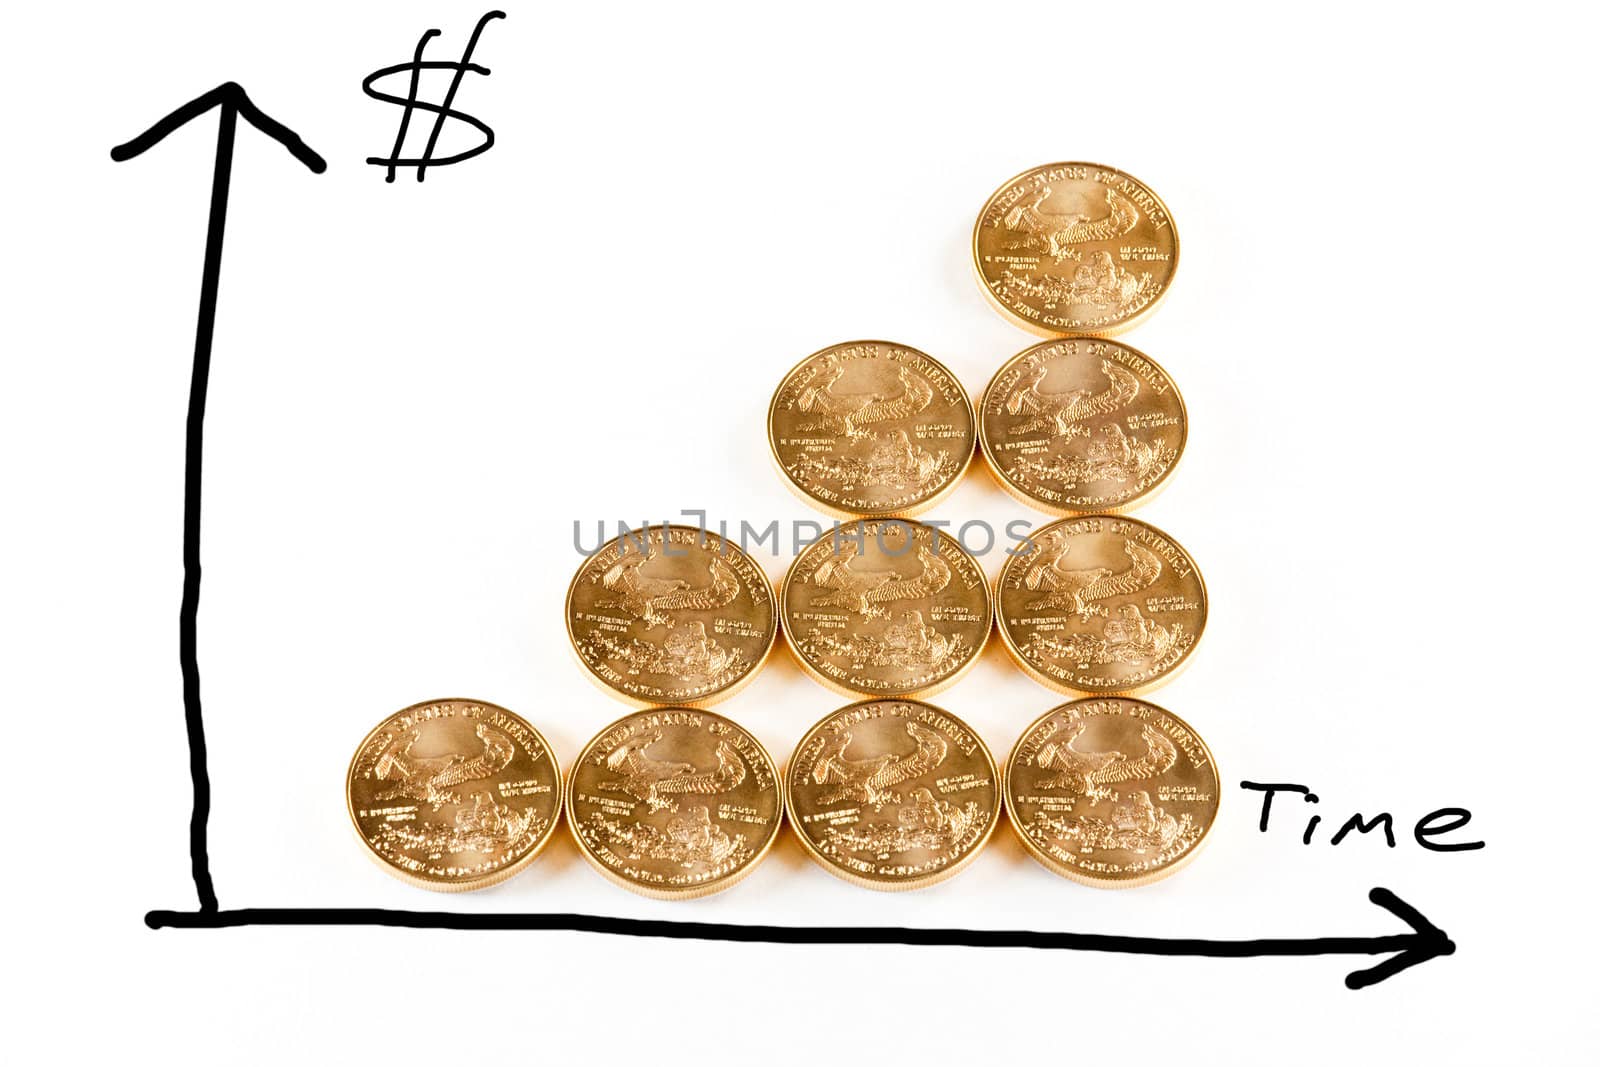 Gold coins forming a graph by steheap